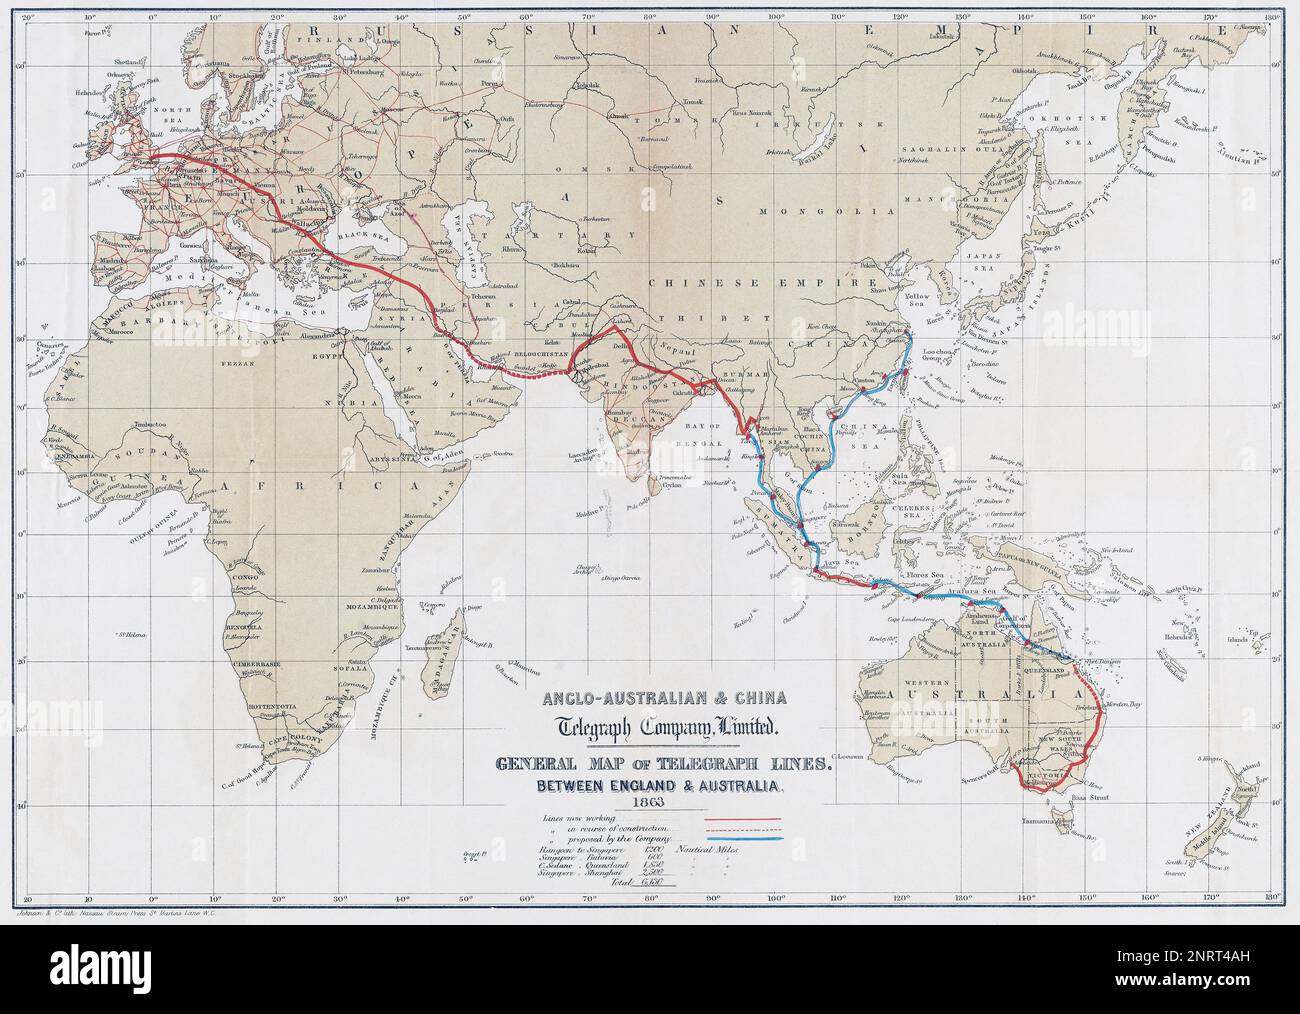 Map showing telegraph lines between England and Australia in 1863.  Proposed lines to China are shown. Stock Photo